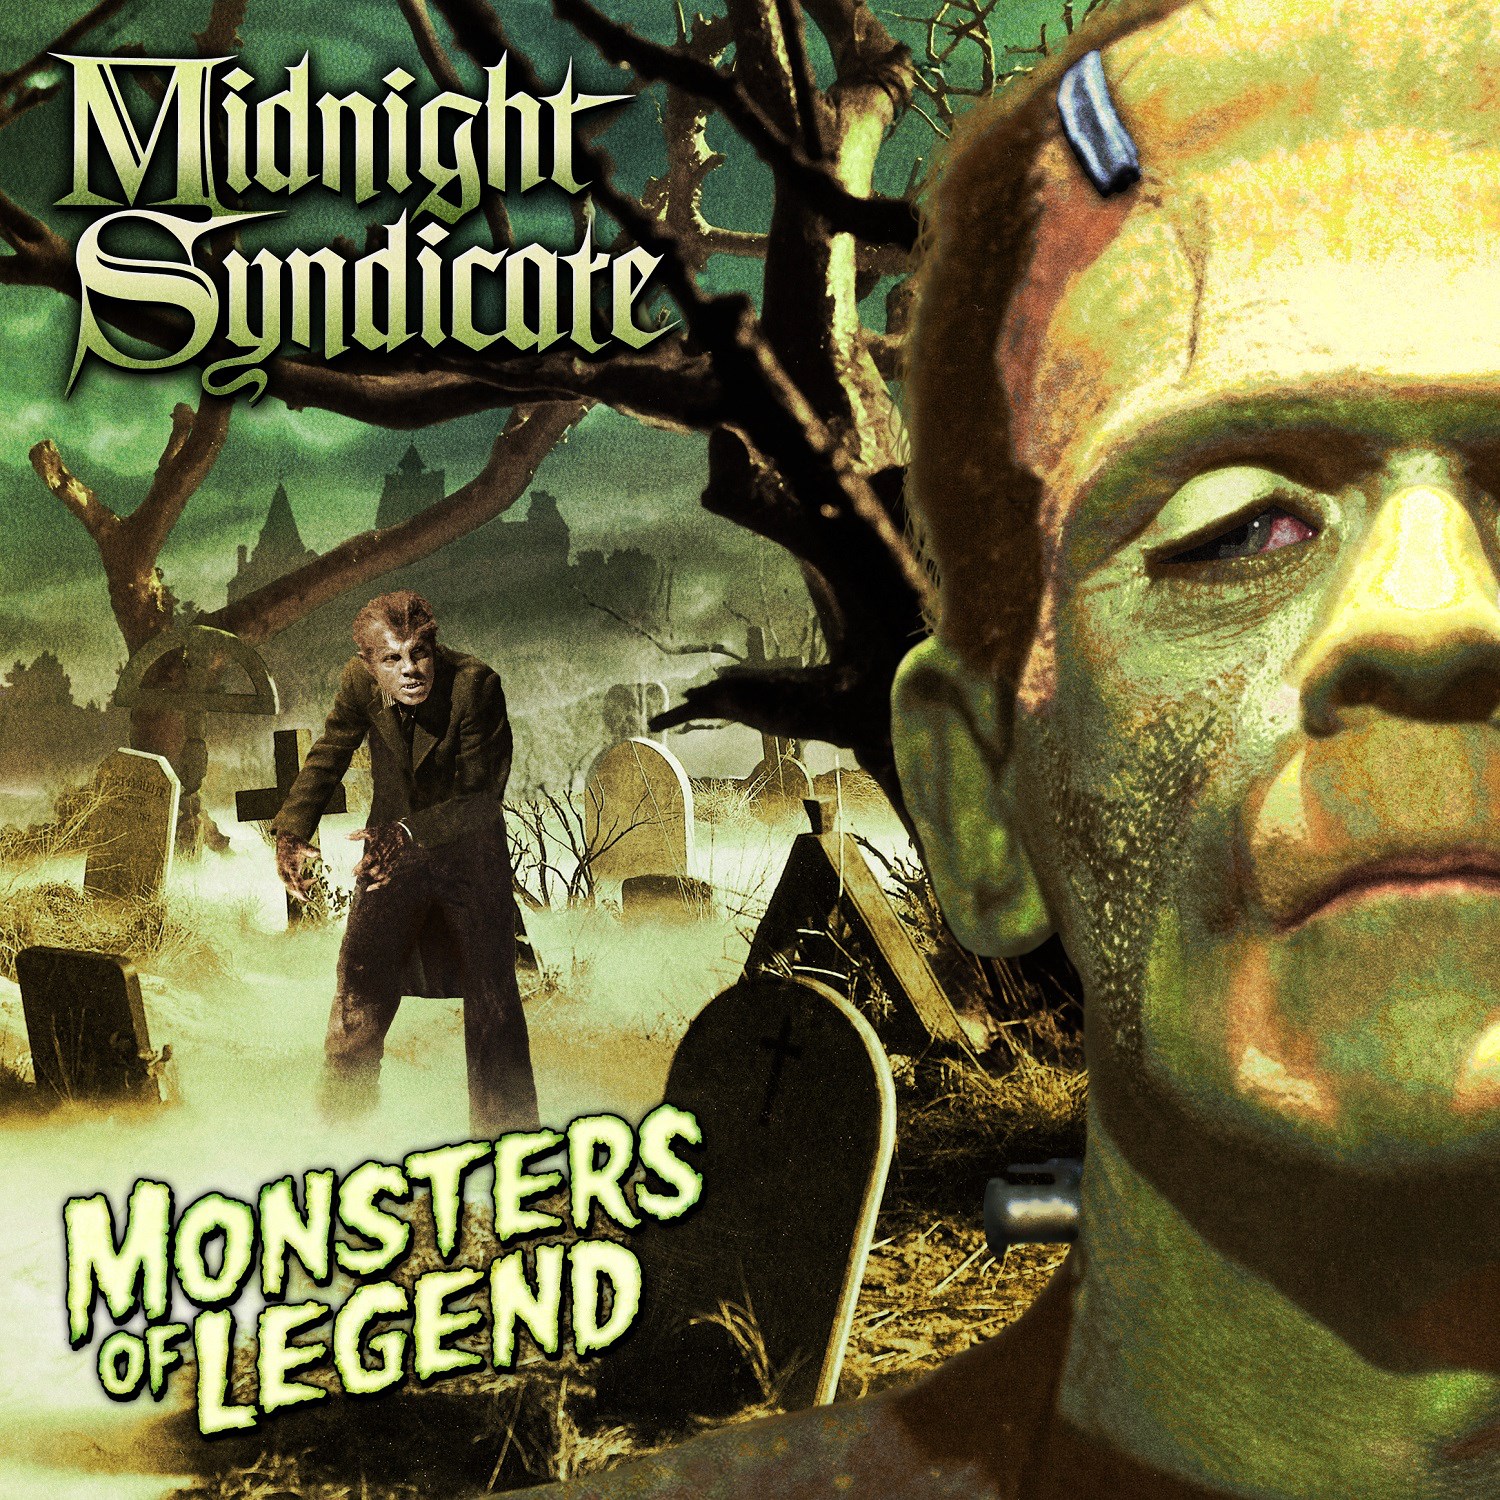 Midnight Syndicate Interview: Behind ‘Monsters of Legend’ and ‘The Axe Giant’